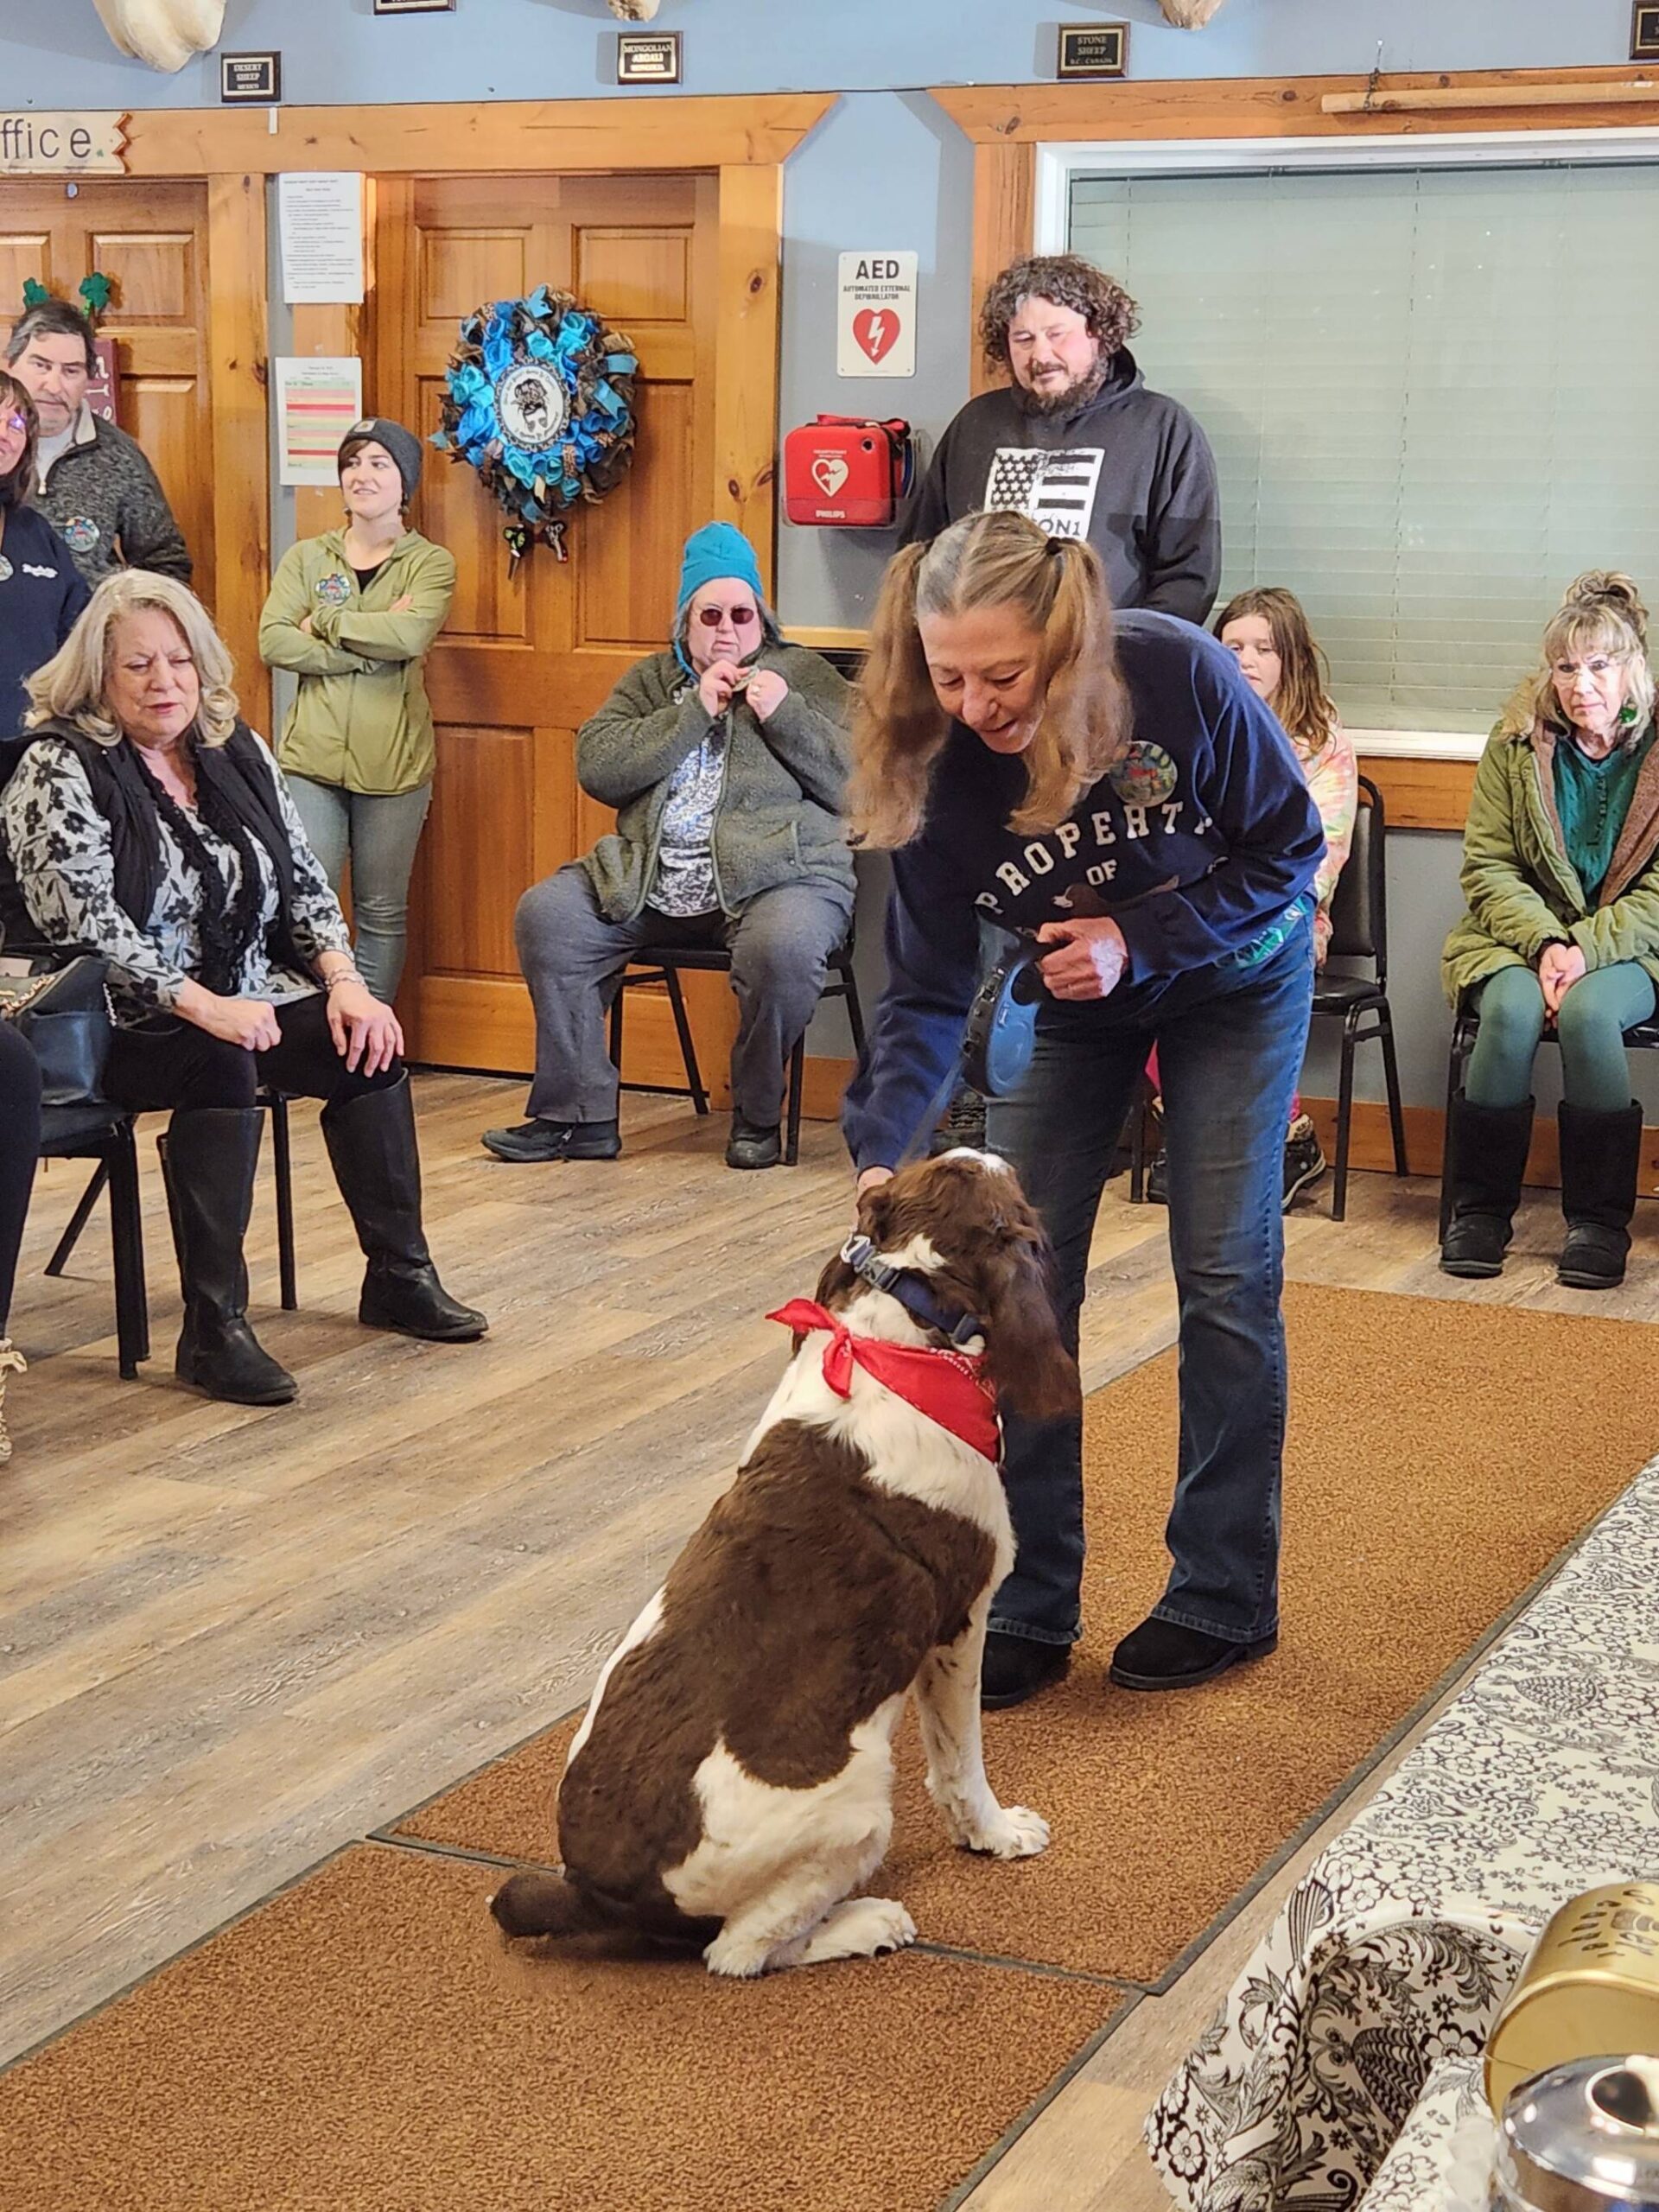 English springer Hank shakes owner Donna Statura’s hand during the Snow Rondi dog show on Sunday, March 5 at the Anchor Point Senior Center in Anchor Point, Alaska. Photo courtesy of Debbie Carpenter